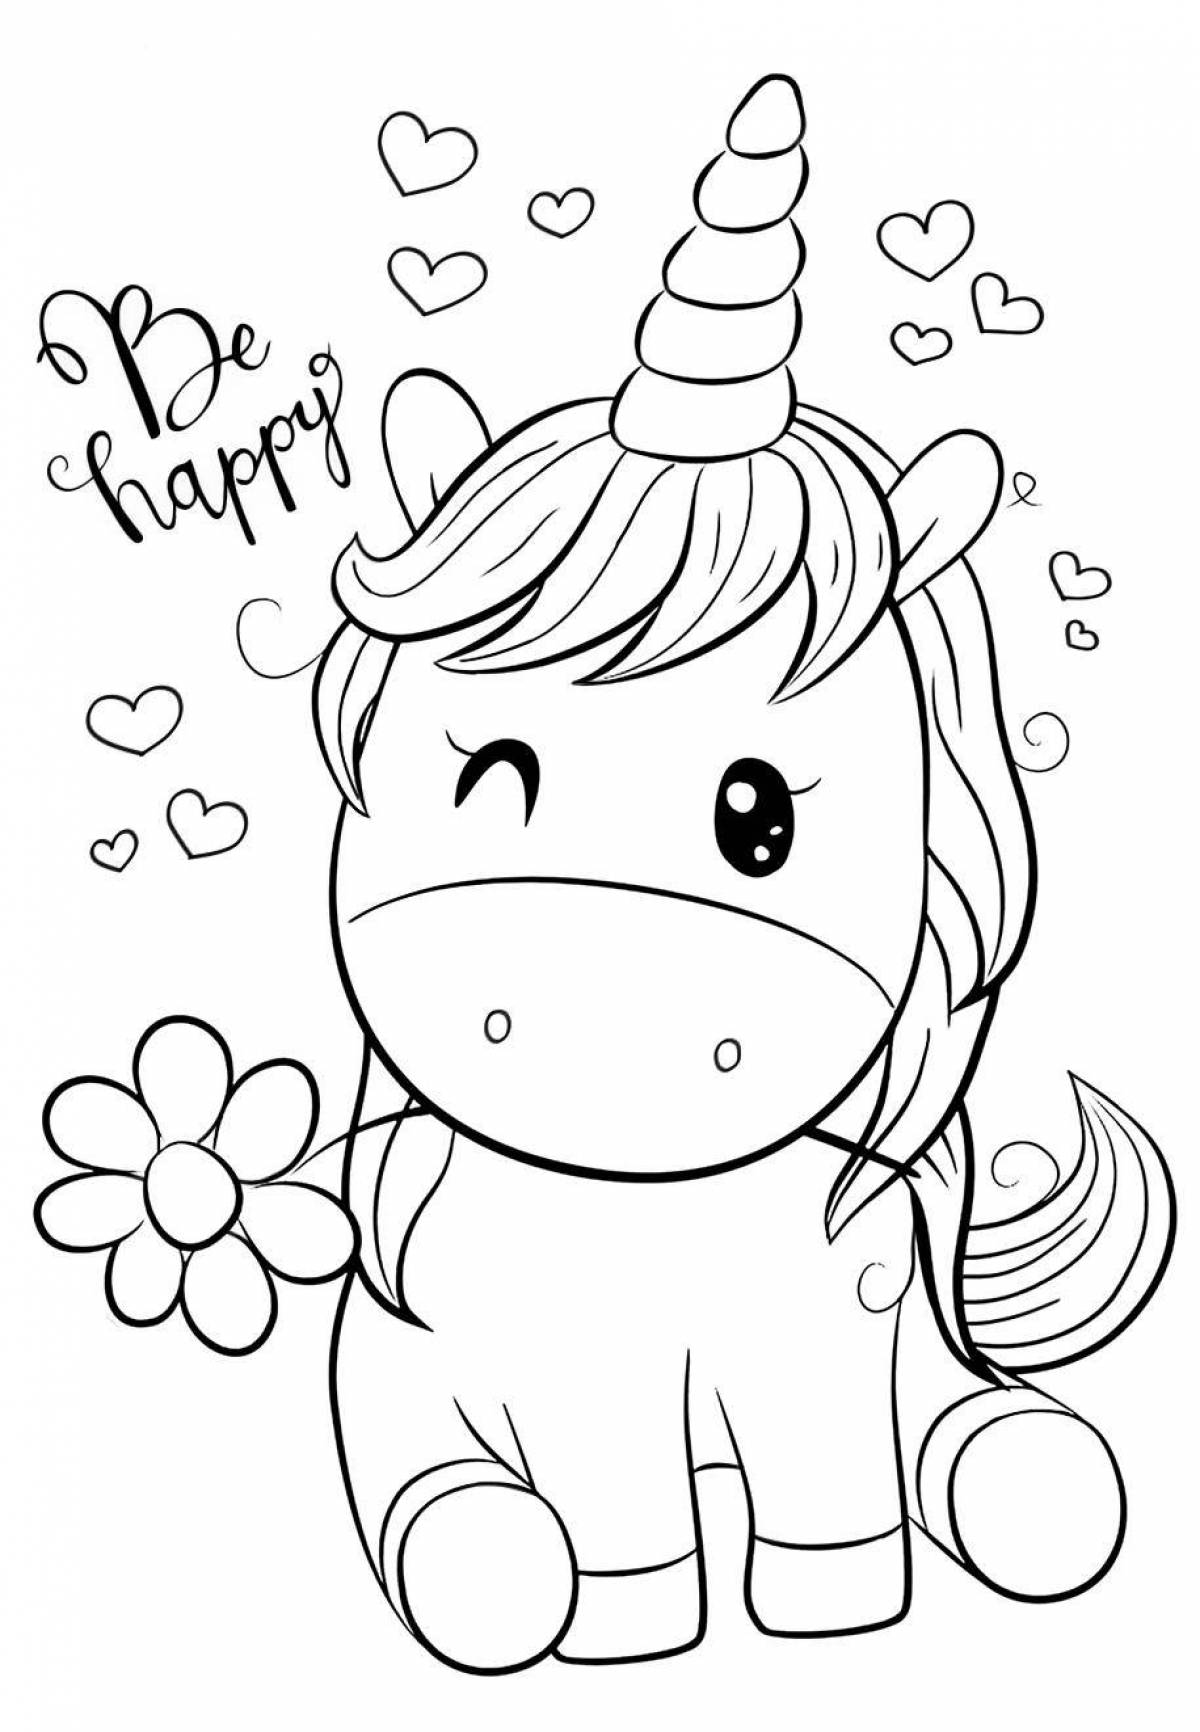 Regal coloring page unicorn picture for kids